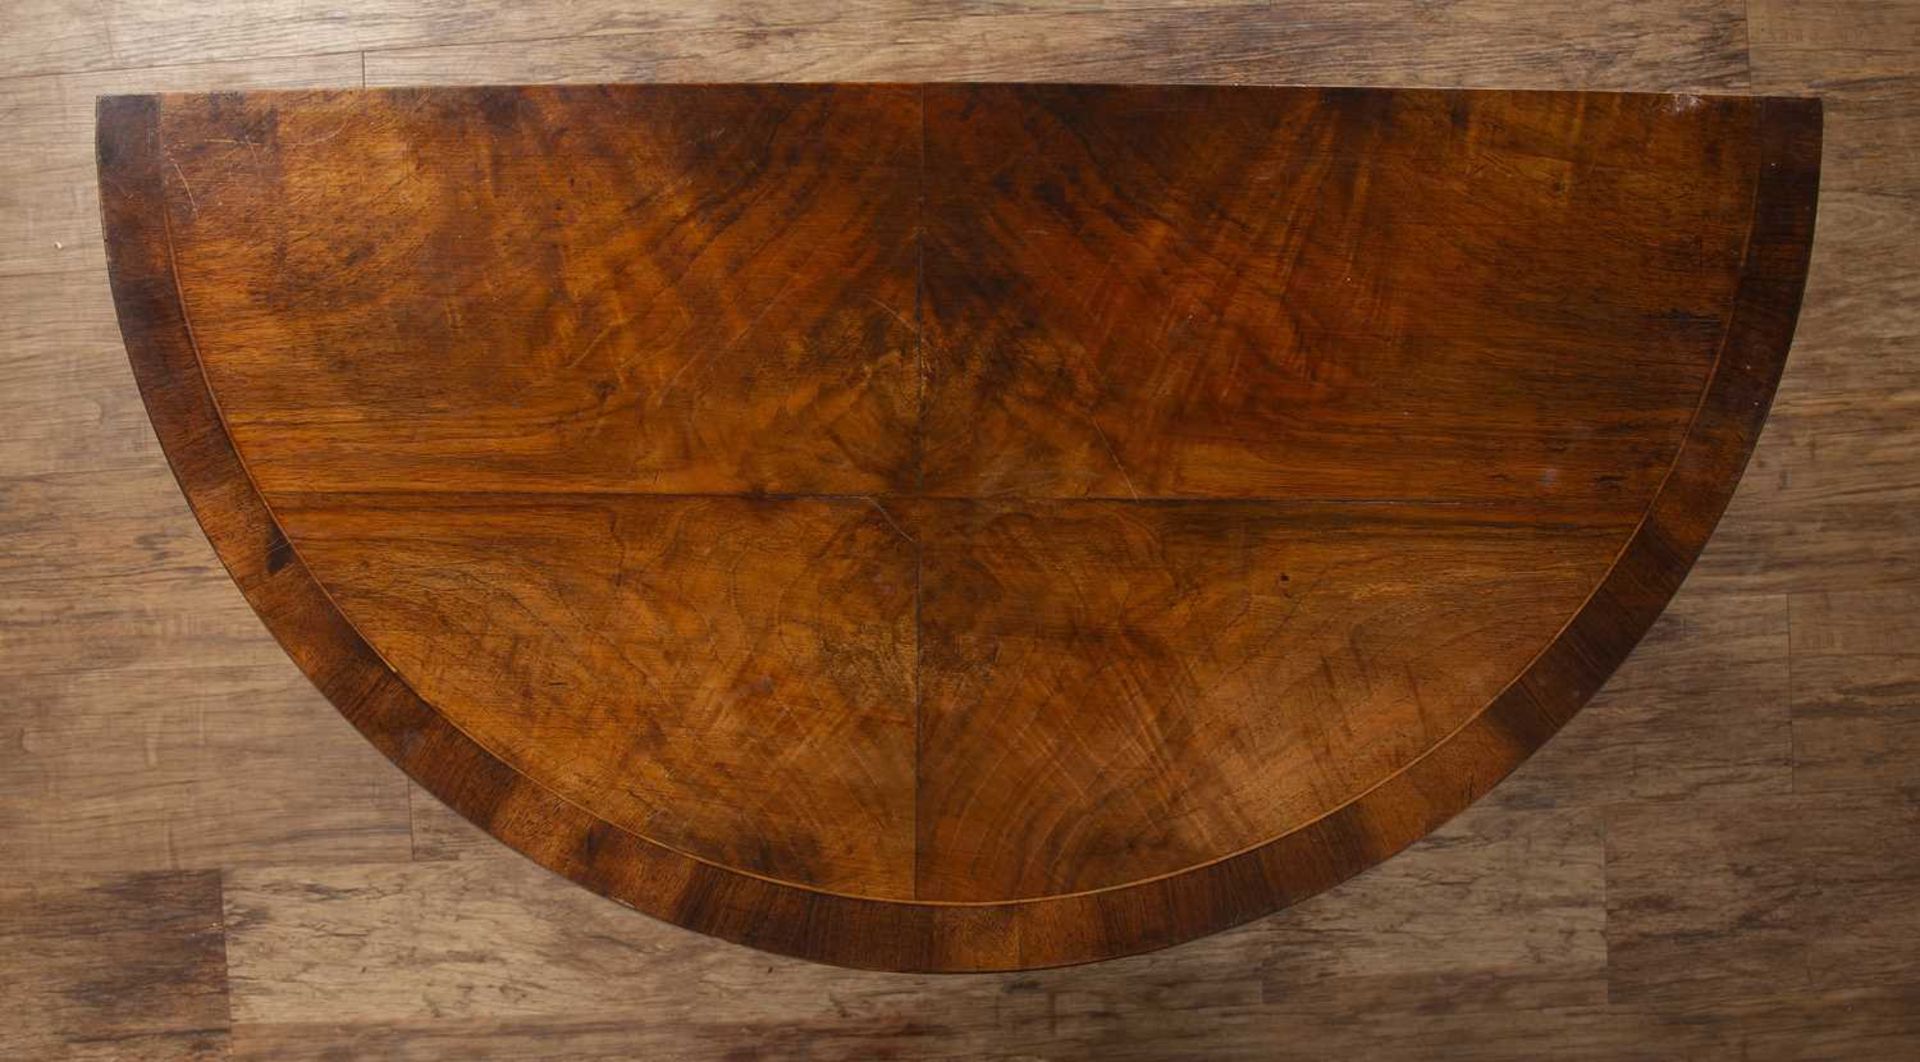 Quarter veneered walnut demi-lune card table Queen Anne style with inset baize on turned support and - Image 6 of 6